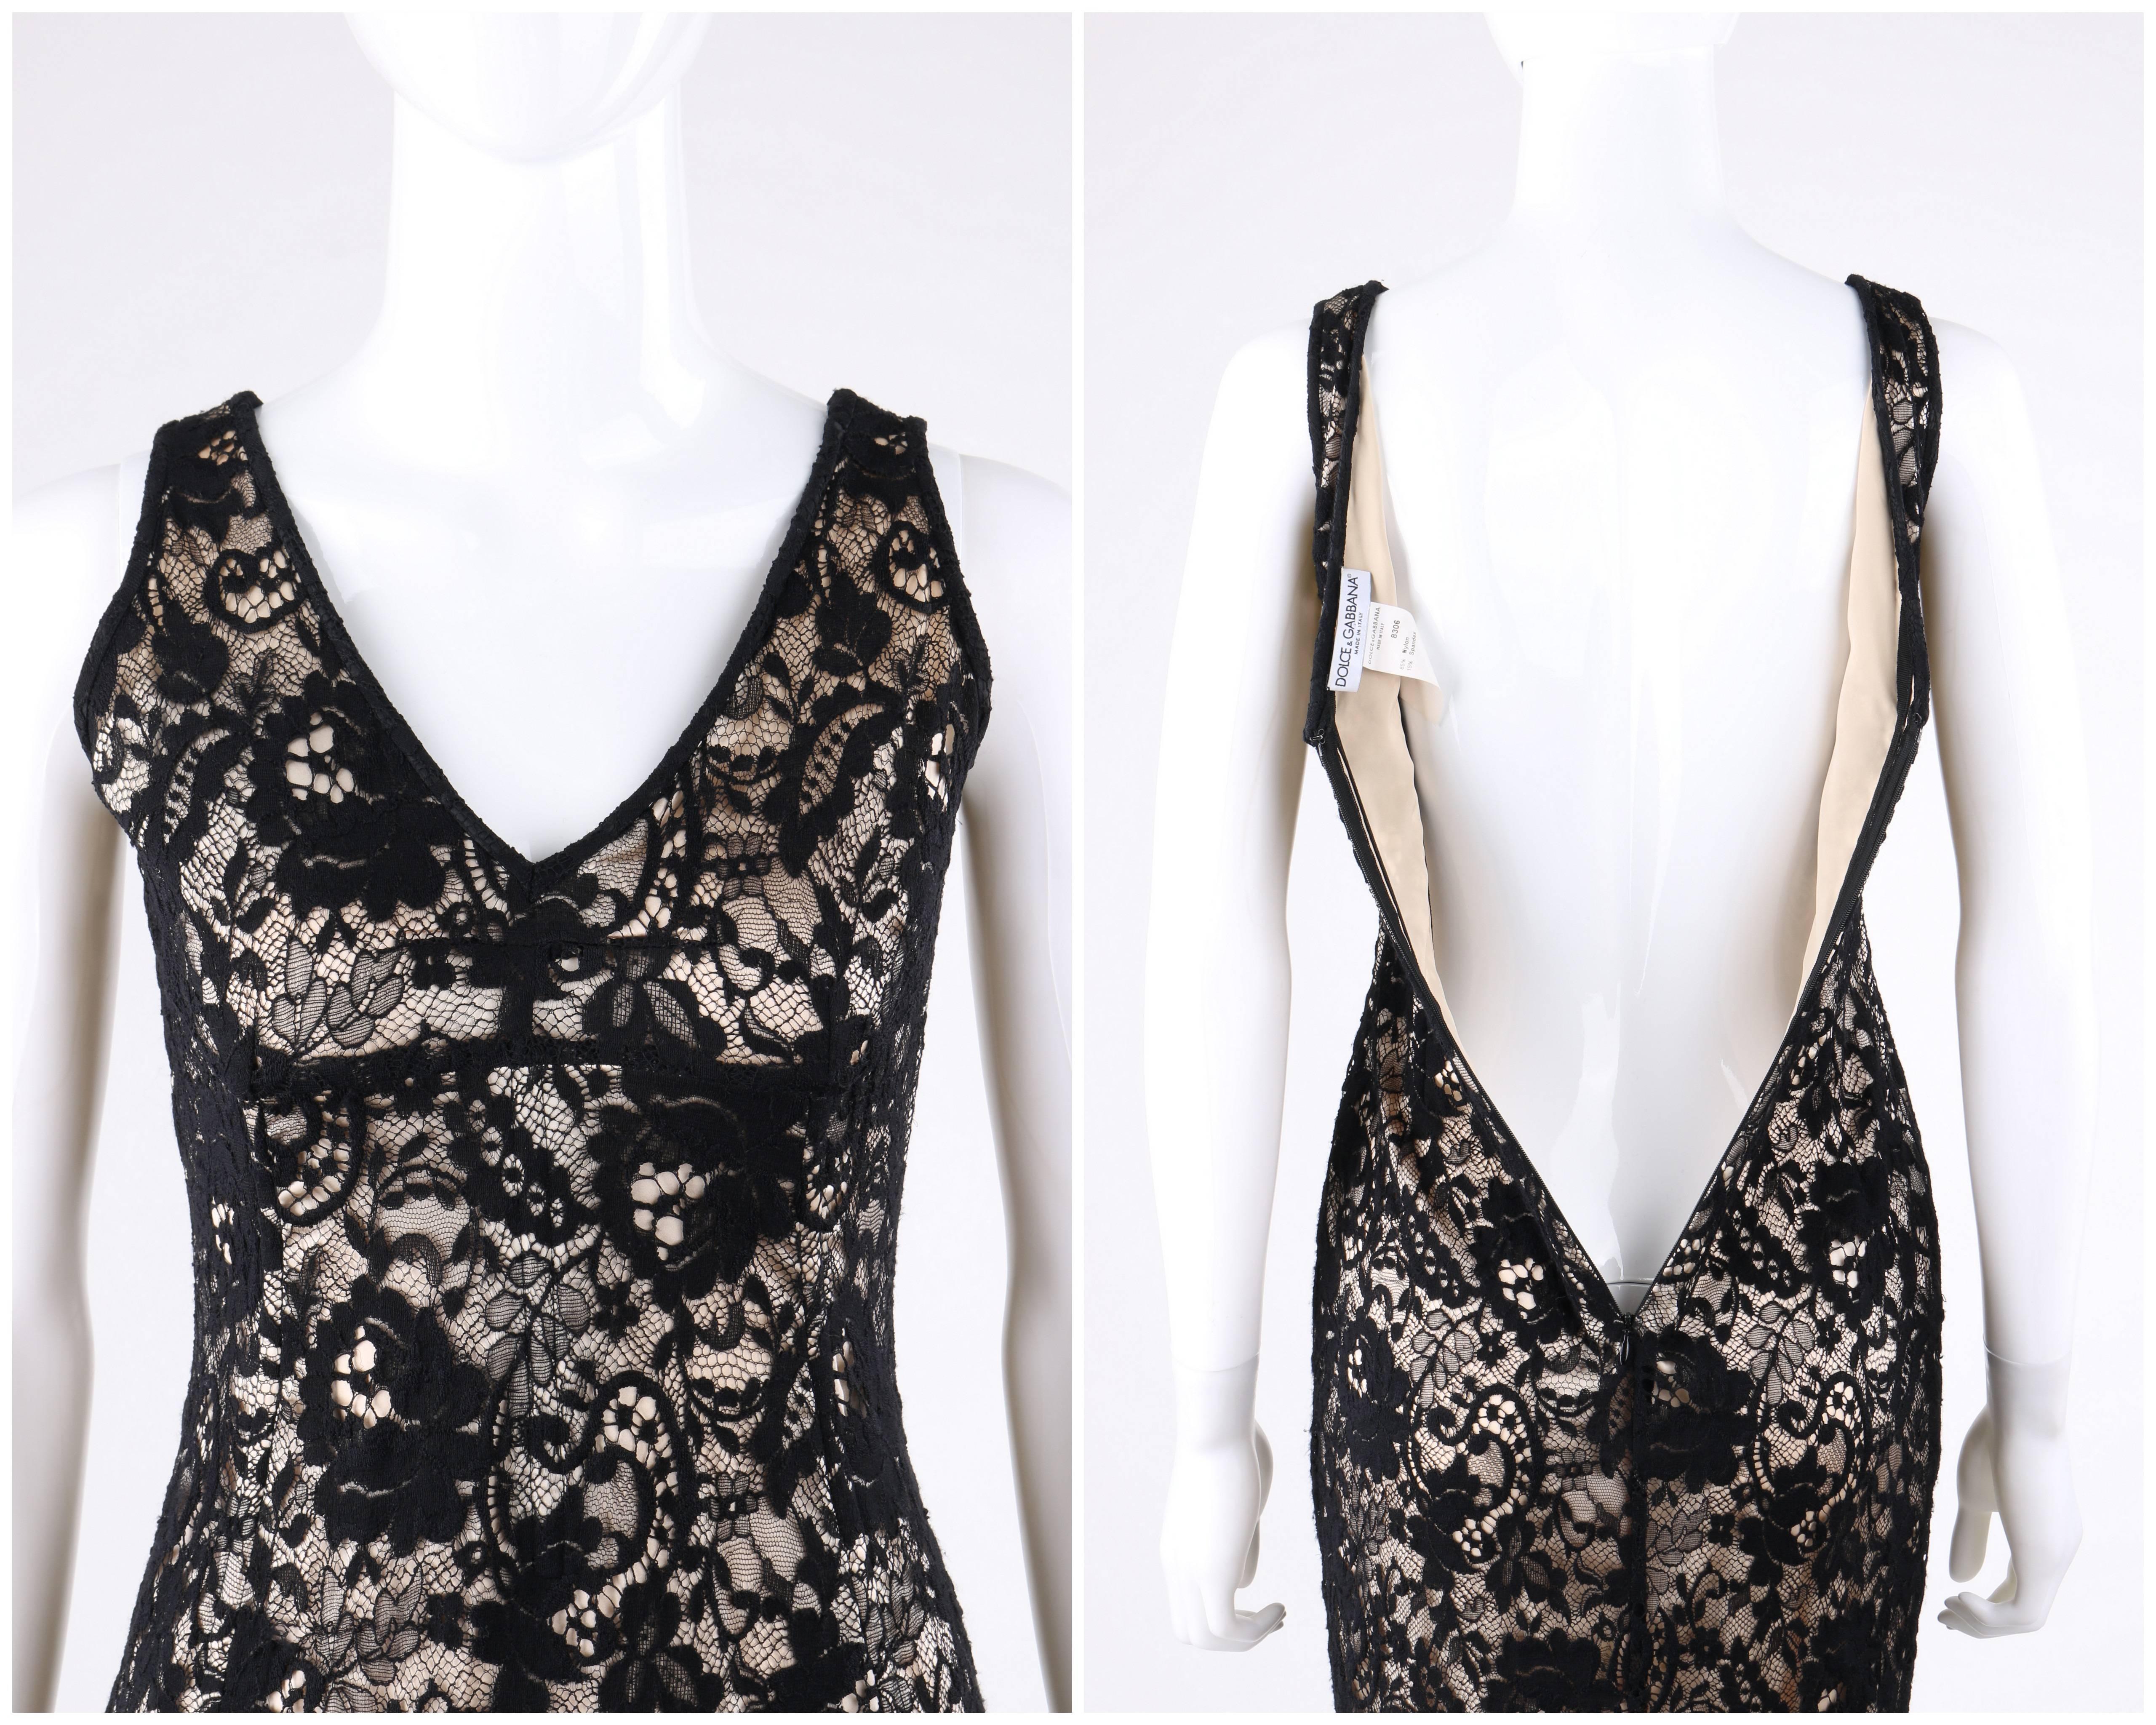 DOLCE & GABBANA A/W 2011 Black Floral Lace Overlay Cocktail Dress In Good Condition For Sale In Thiensville, WI